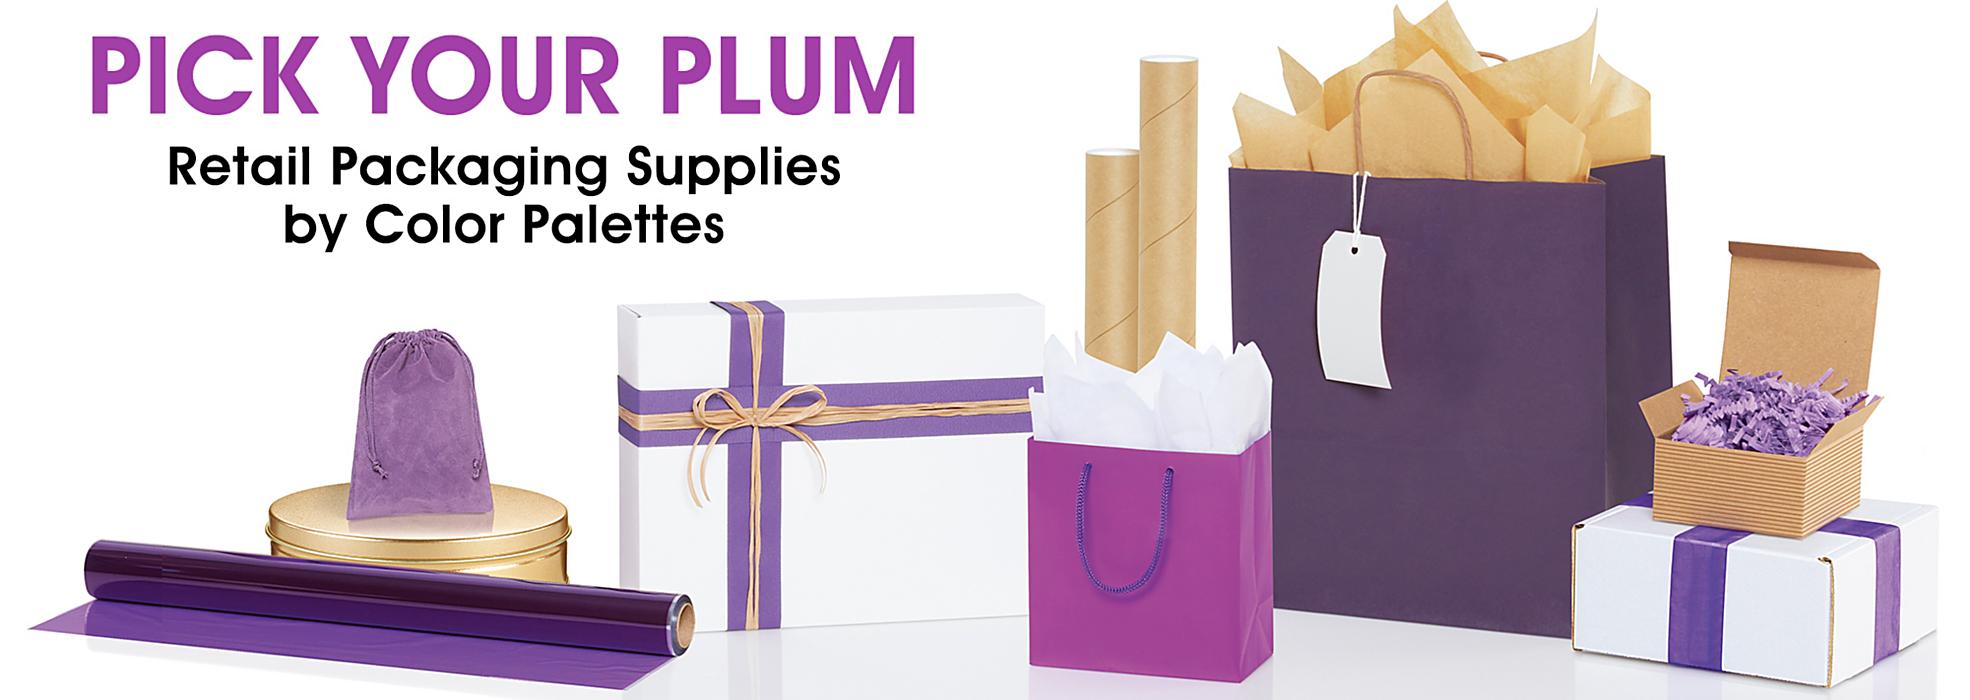 Pick Your Plum - Retail Packaging Supplies by Color Palettes